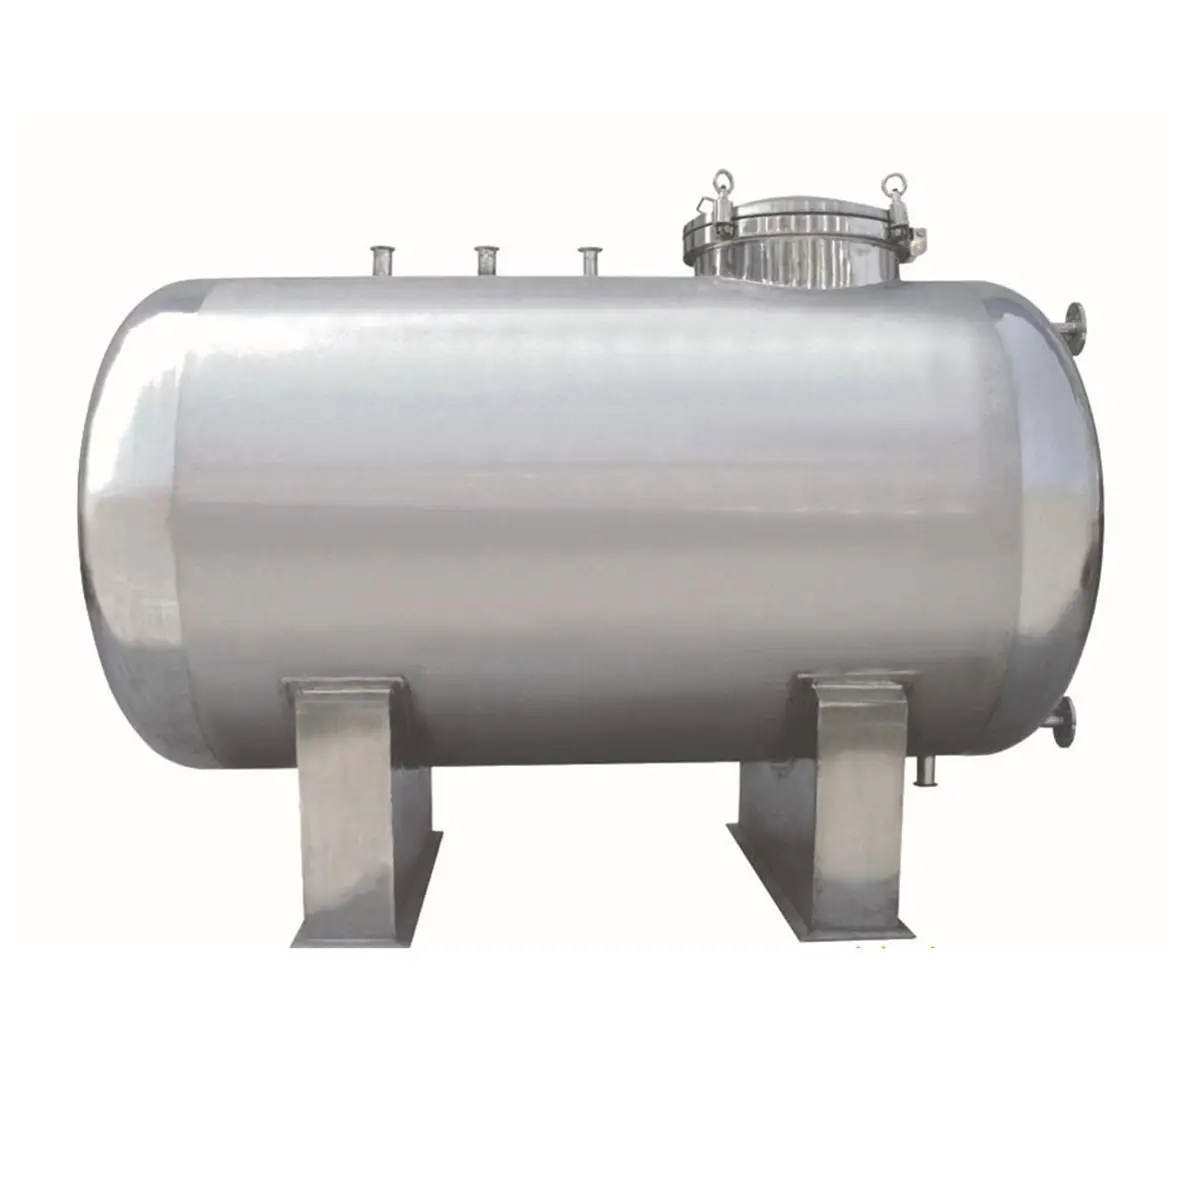 Stainless Steel Horizontal Tank For Gas Or Liquid Storage